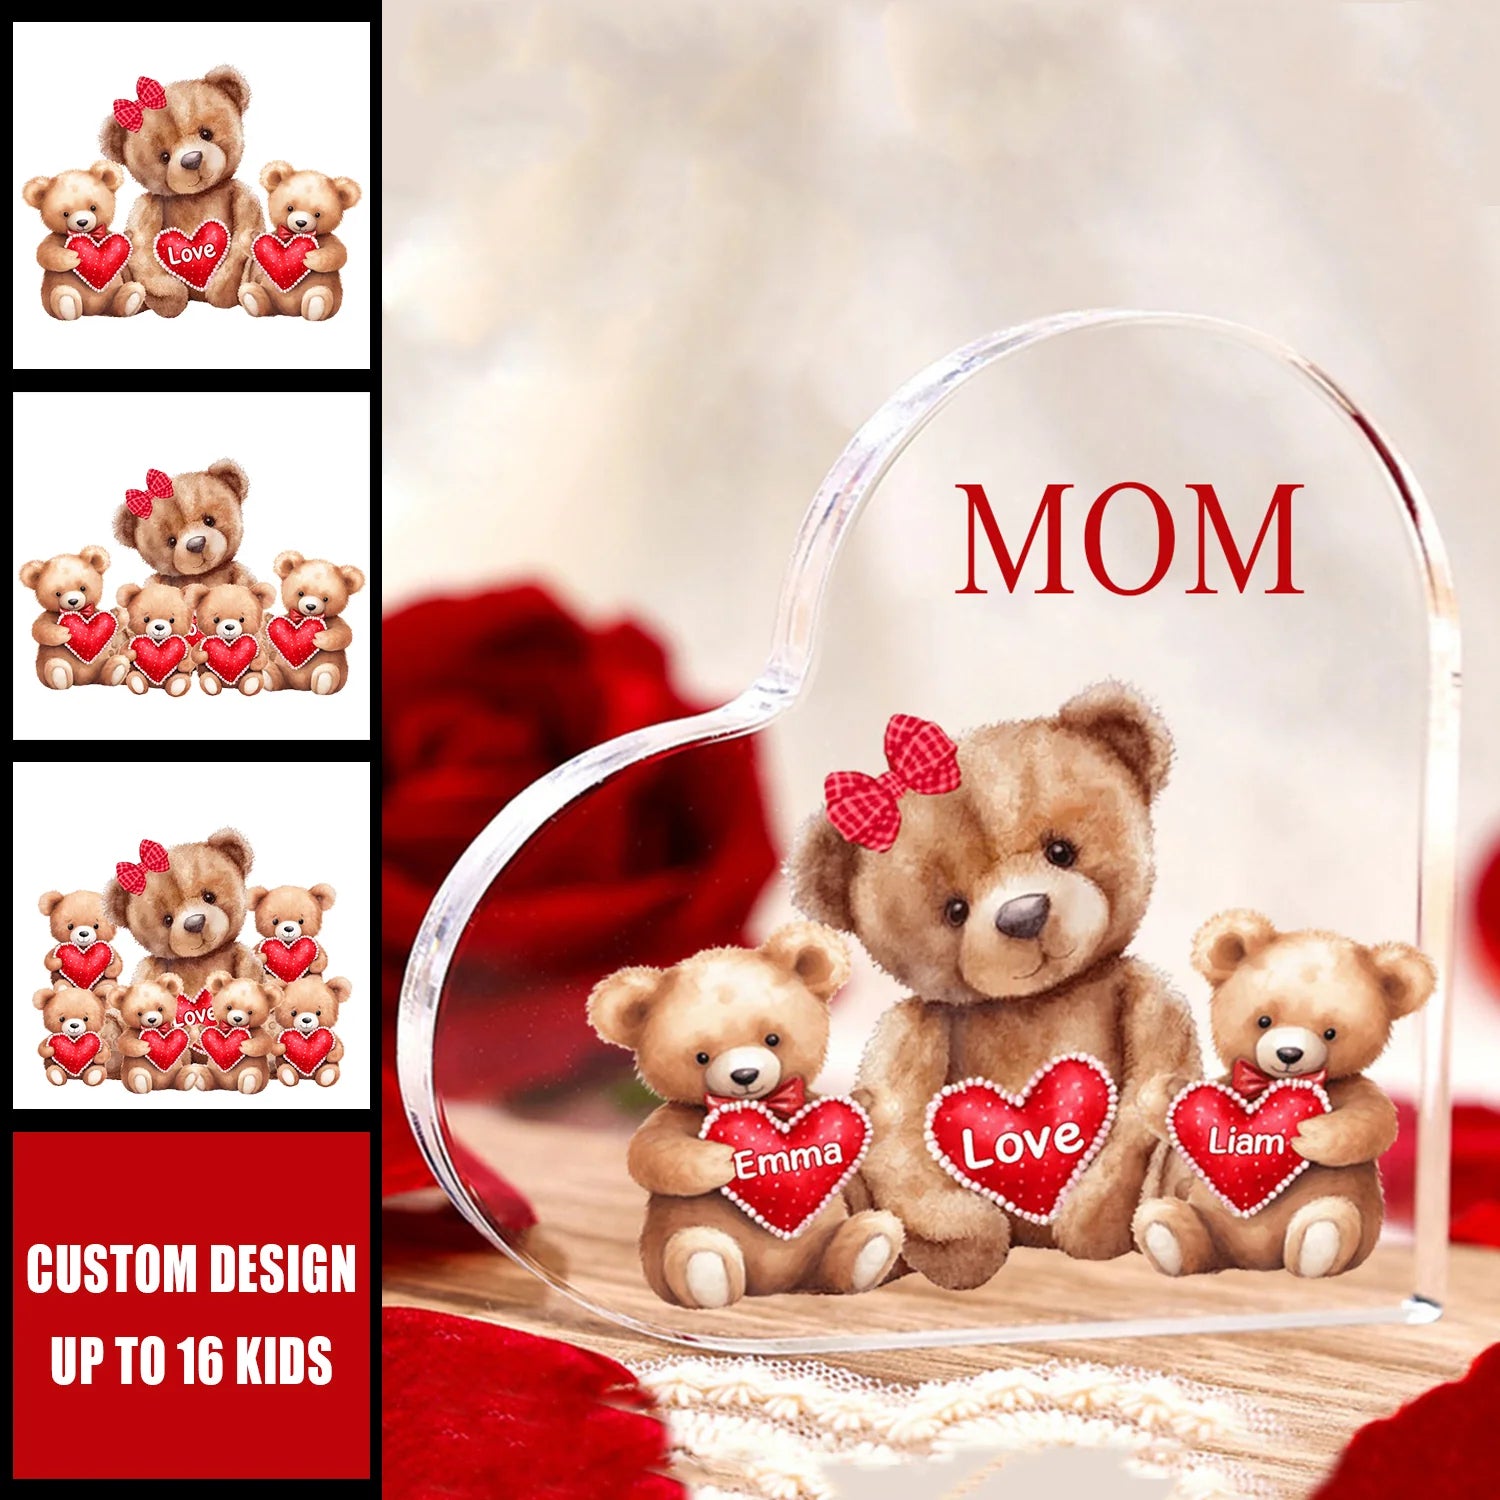 Mama/Nana Bear With Little Kids - Personalized Acrylic Plaque Mother's Day Gift